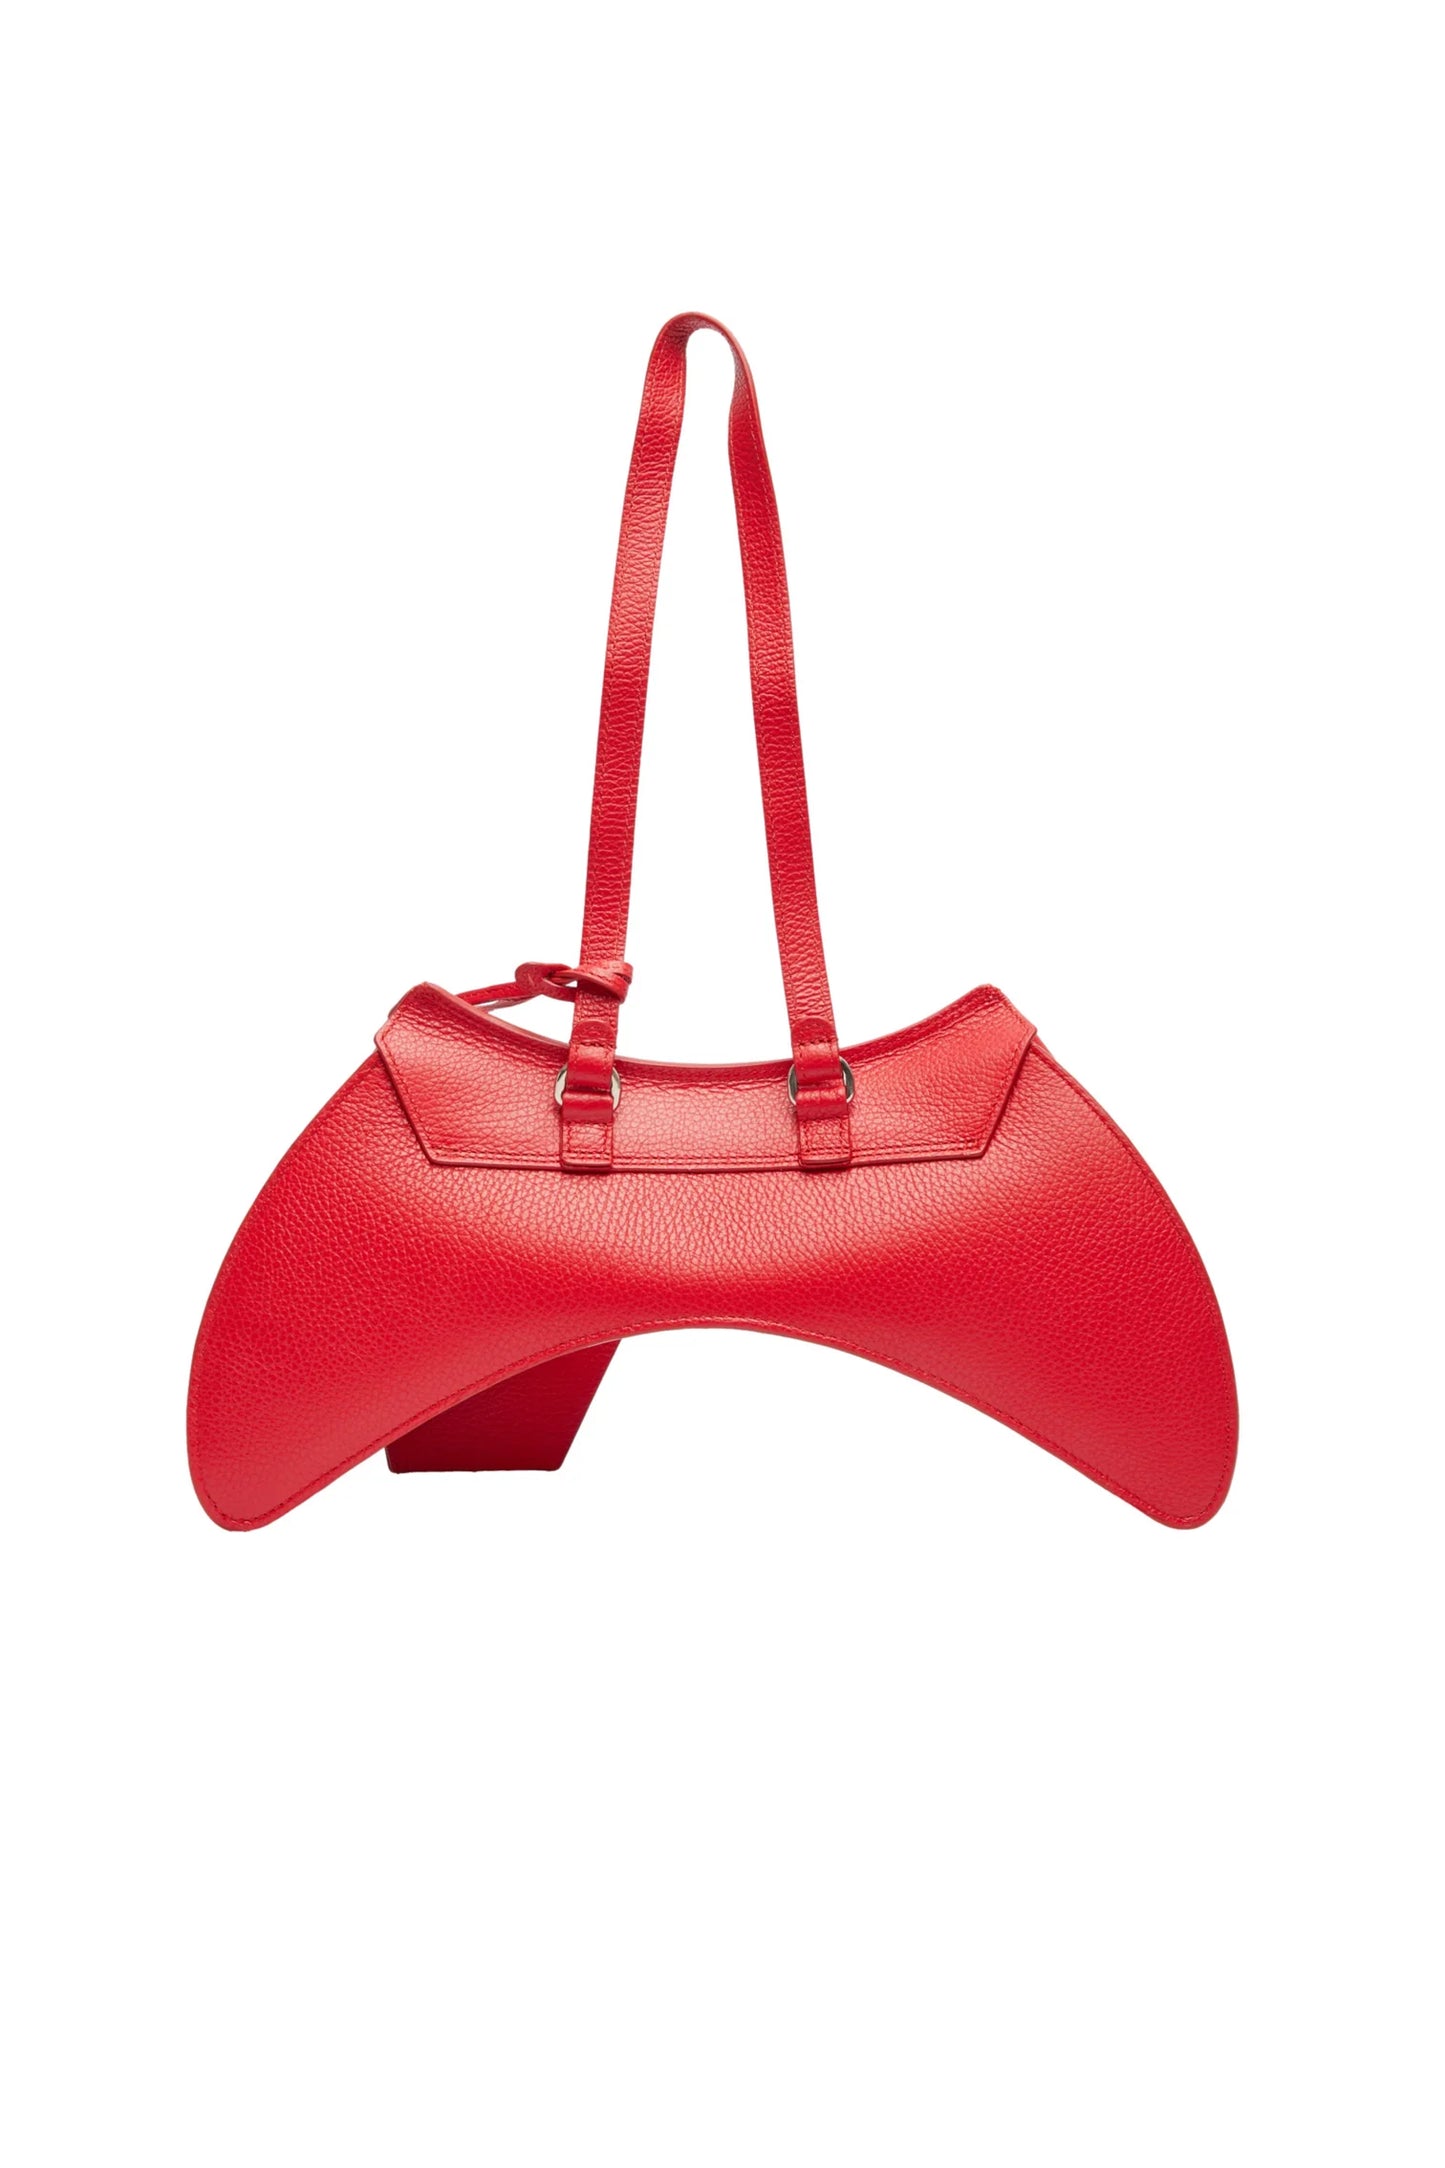 SAC "MANNETTE" RED